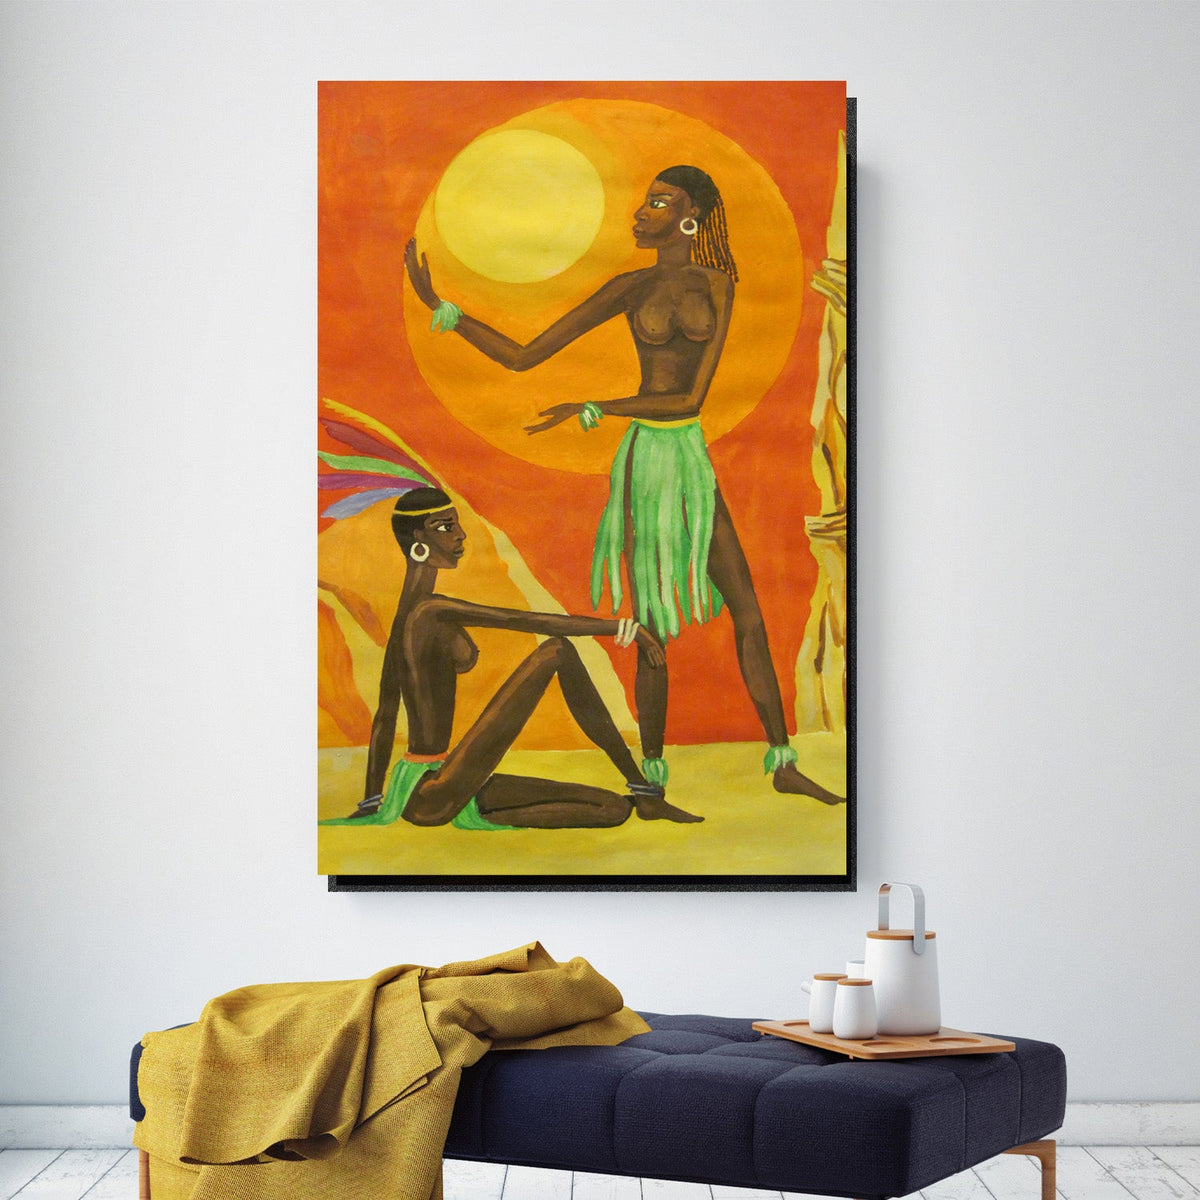 https://cdn.shopify.com/s/files/1/0387/9986/8044/products/AfricanCoupleCanvasArtprintStretched-2.jpg